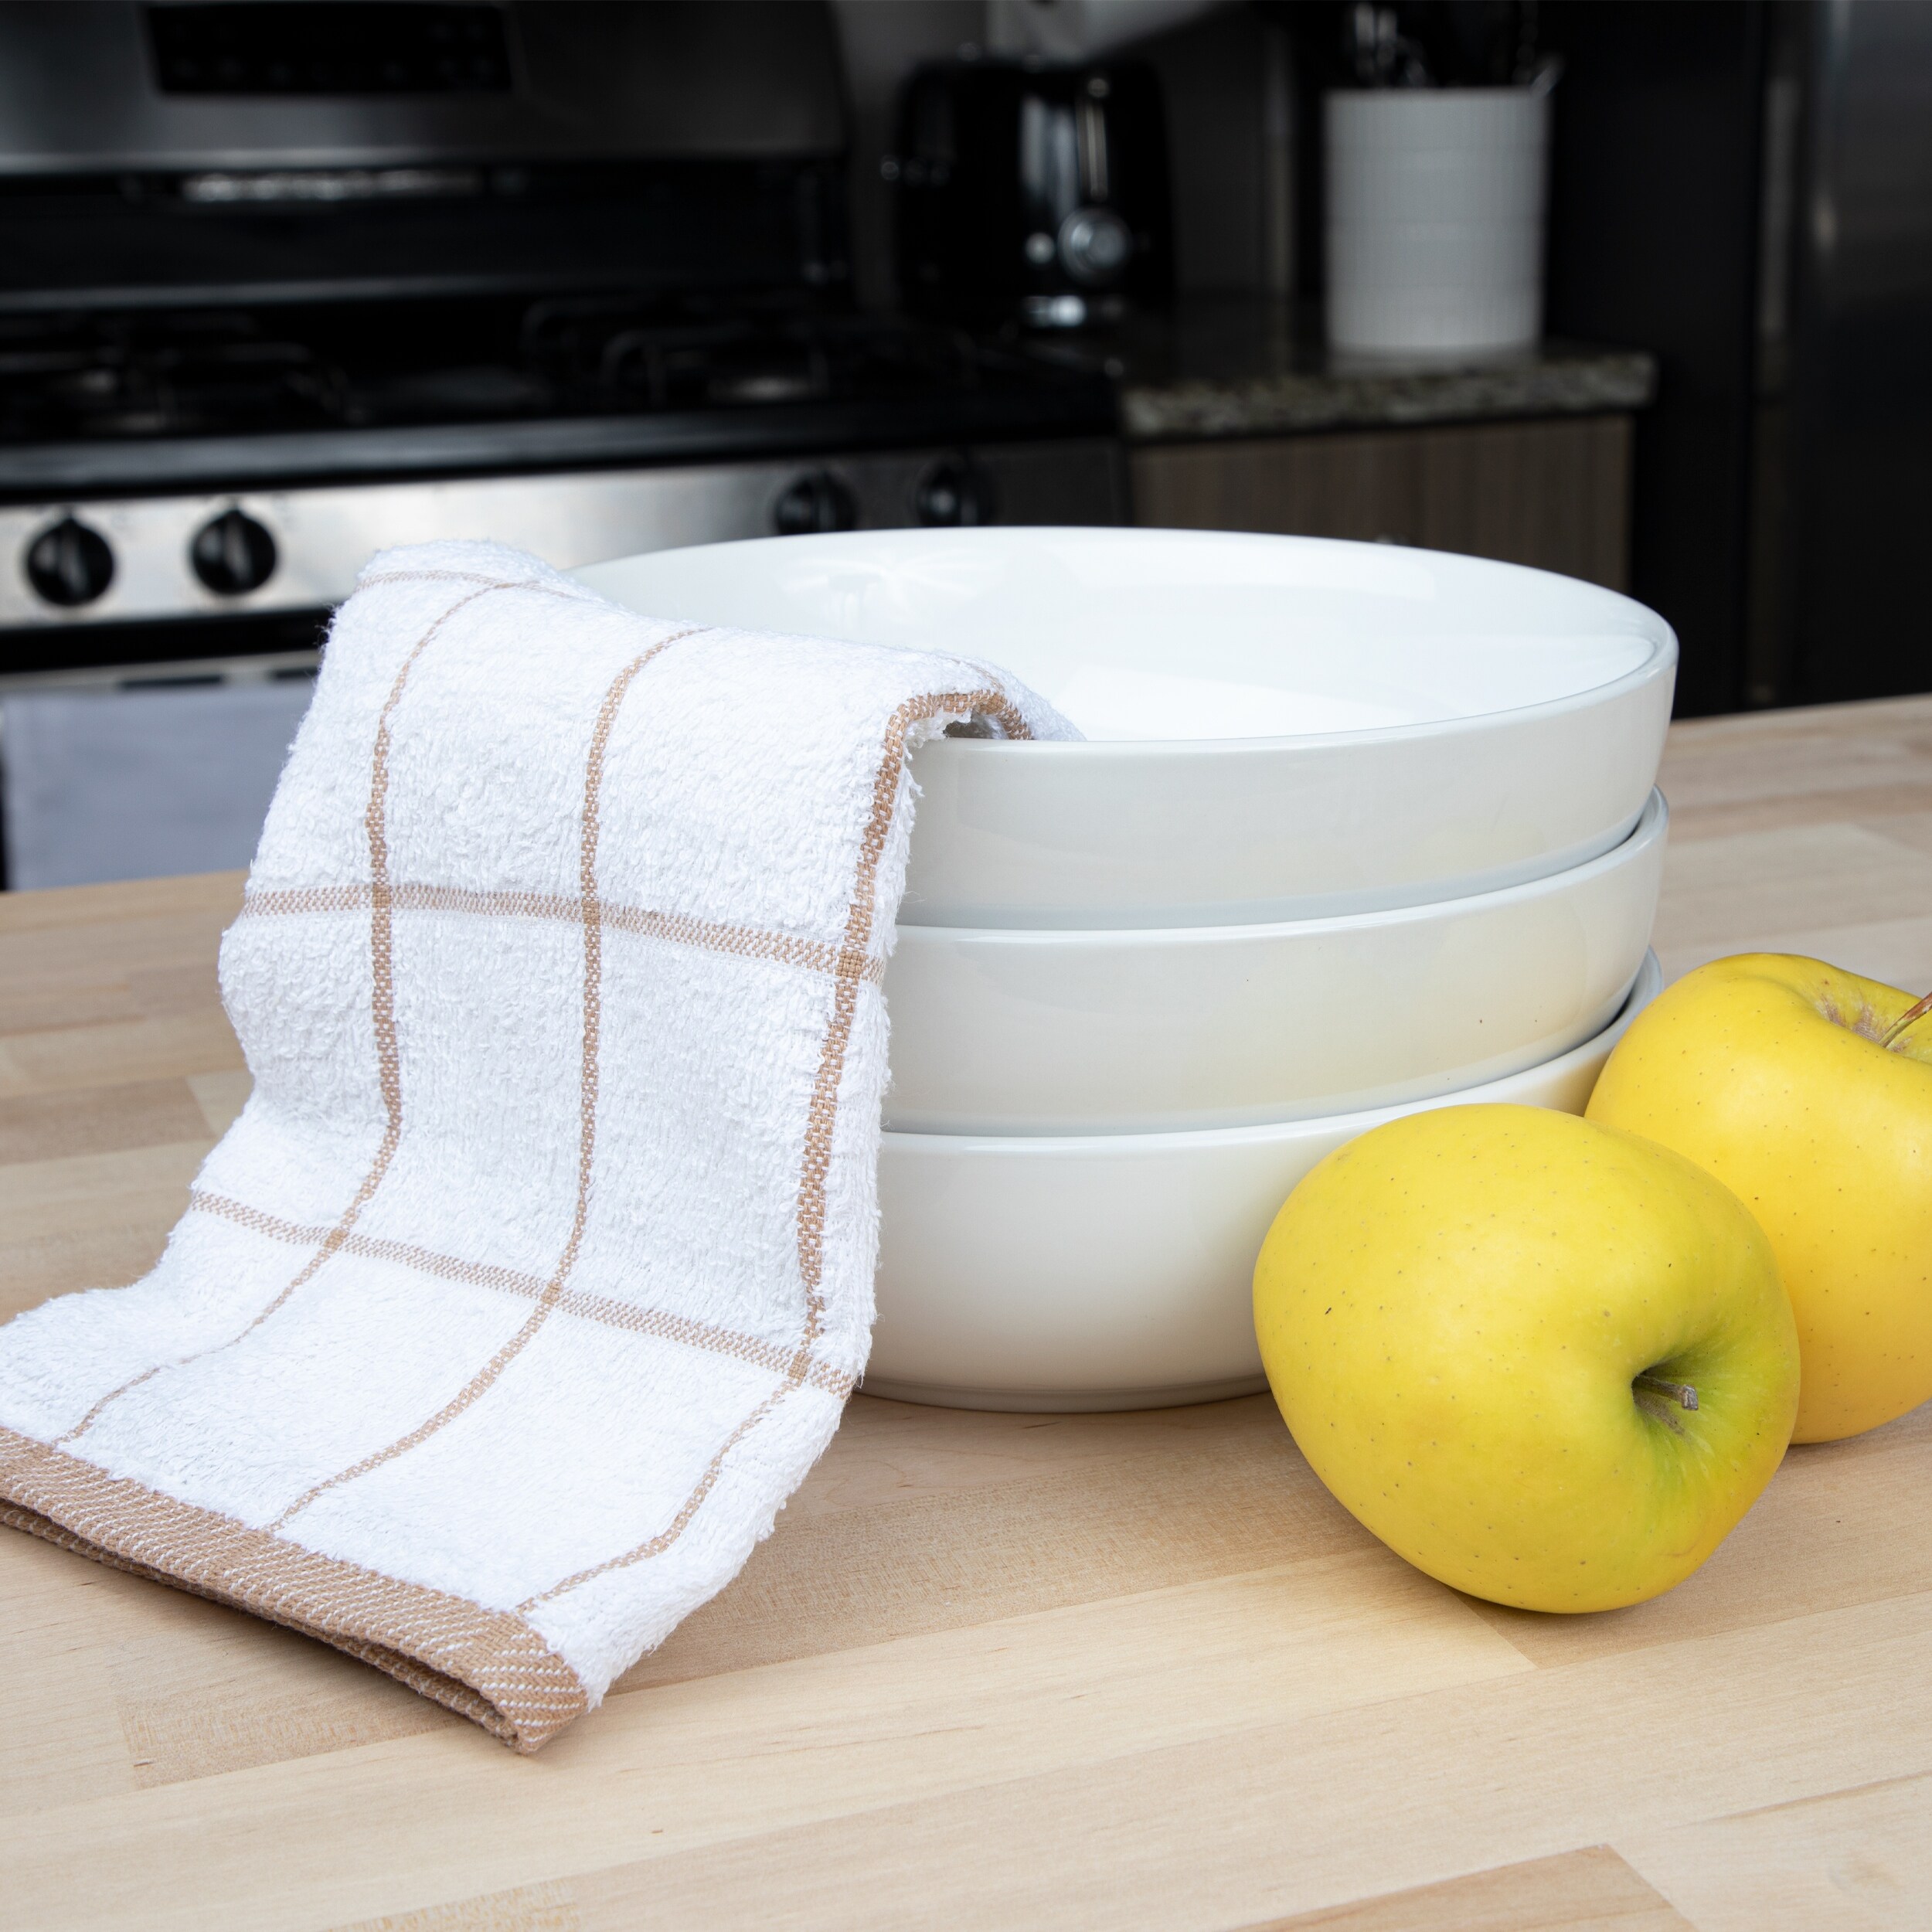 https://ak1.ostkcdn.com/images/products/is/images/direct/cfe501bf3cfce54d3f4024965972665d06559fb1/Cooks-Linen-Kitchen-Towels---12-Pack.jpg